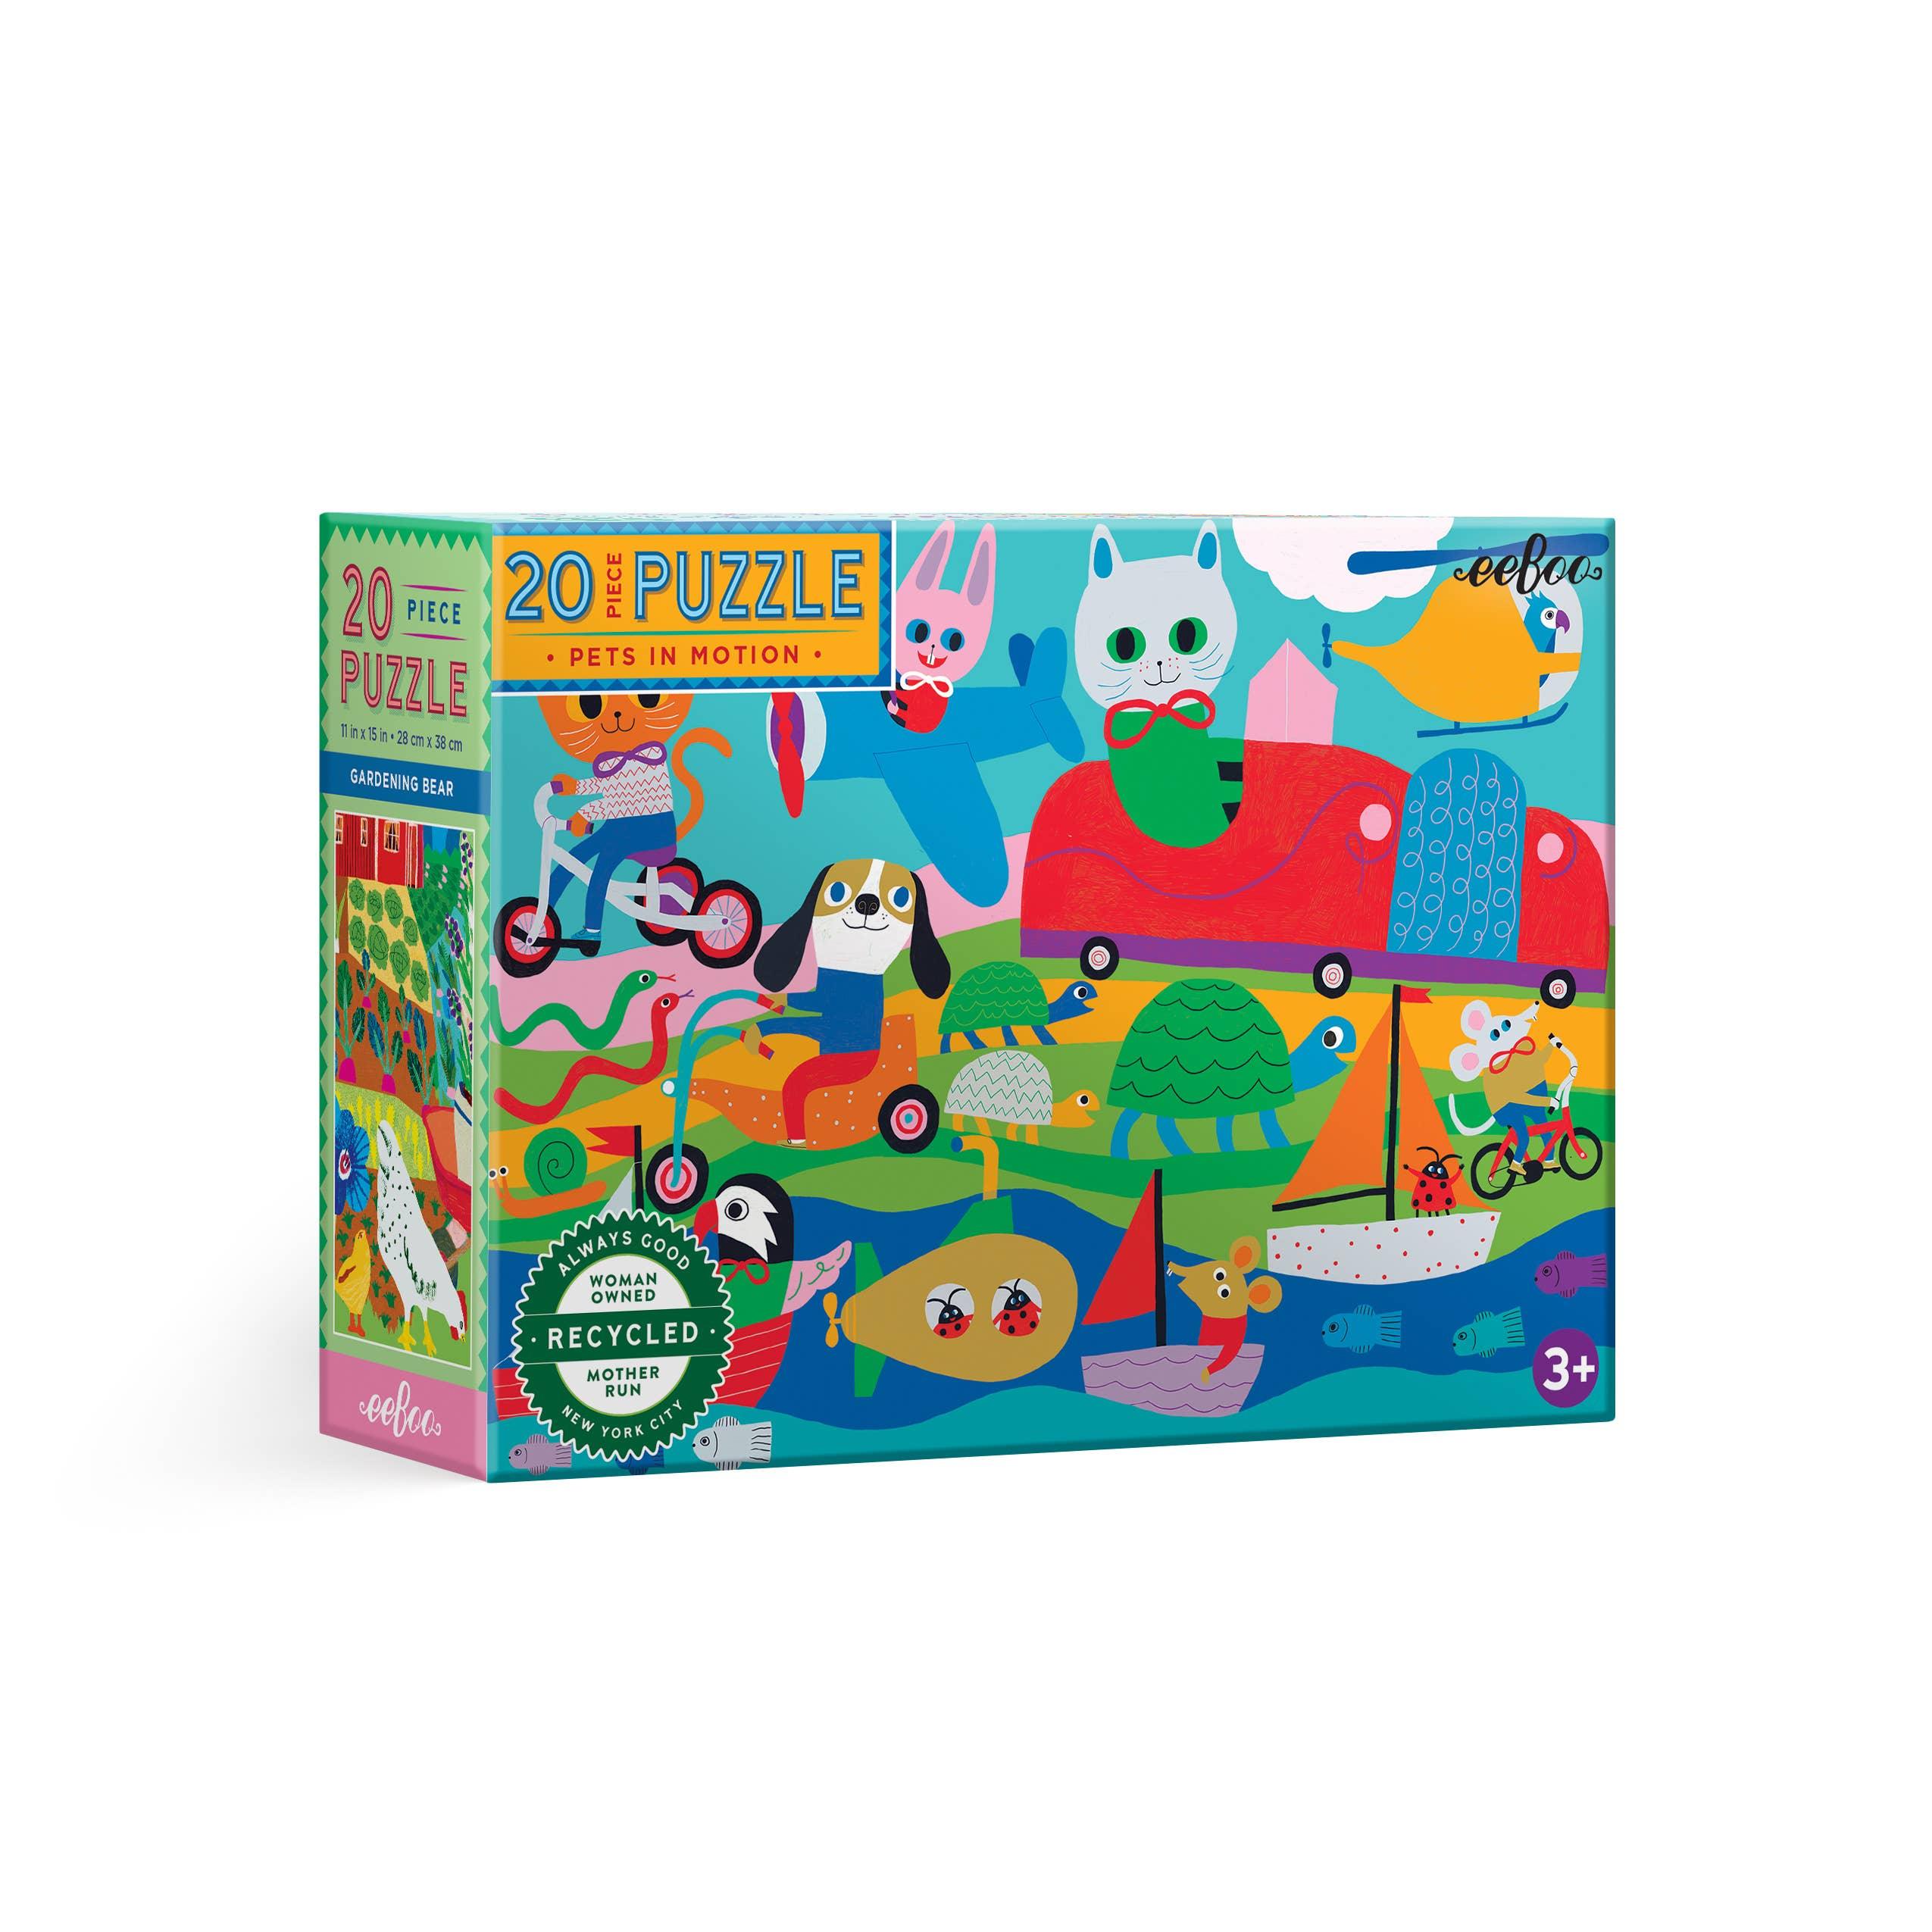 Pets in Motion 20 Piece Puzzle - Why and Whale